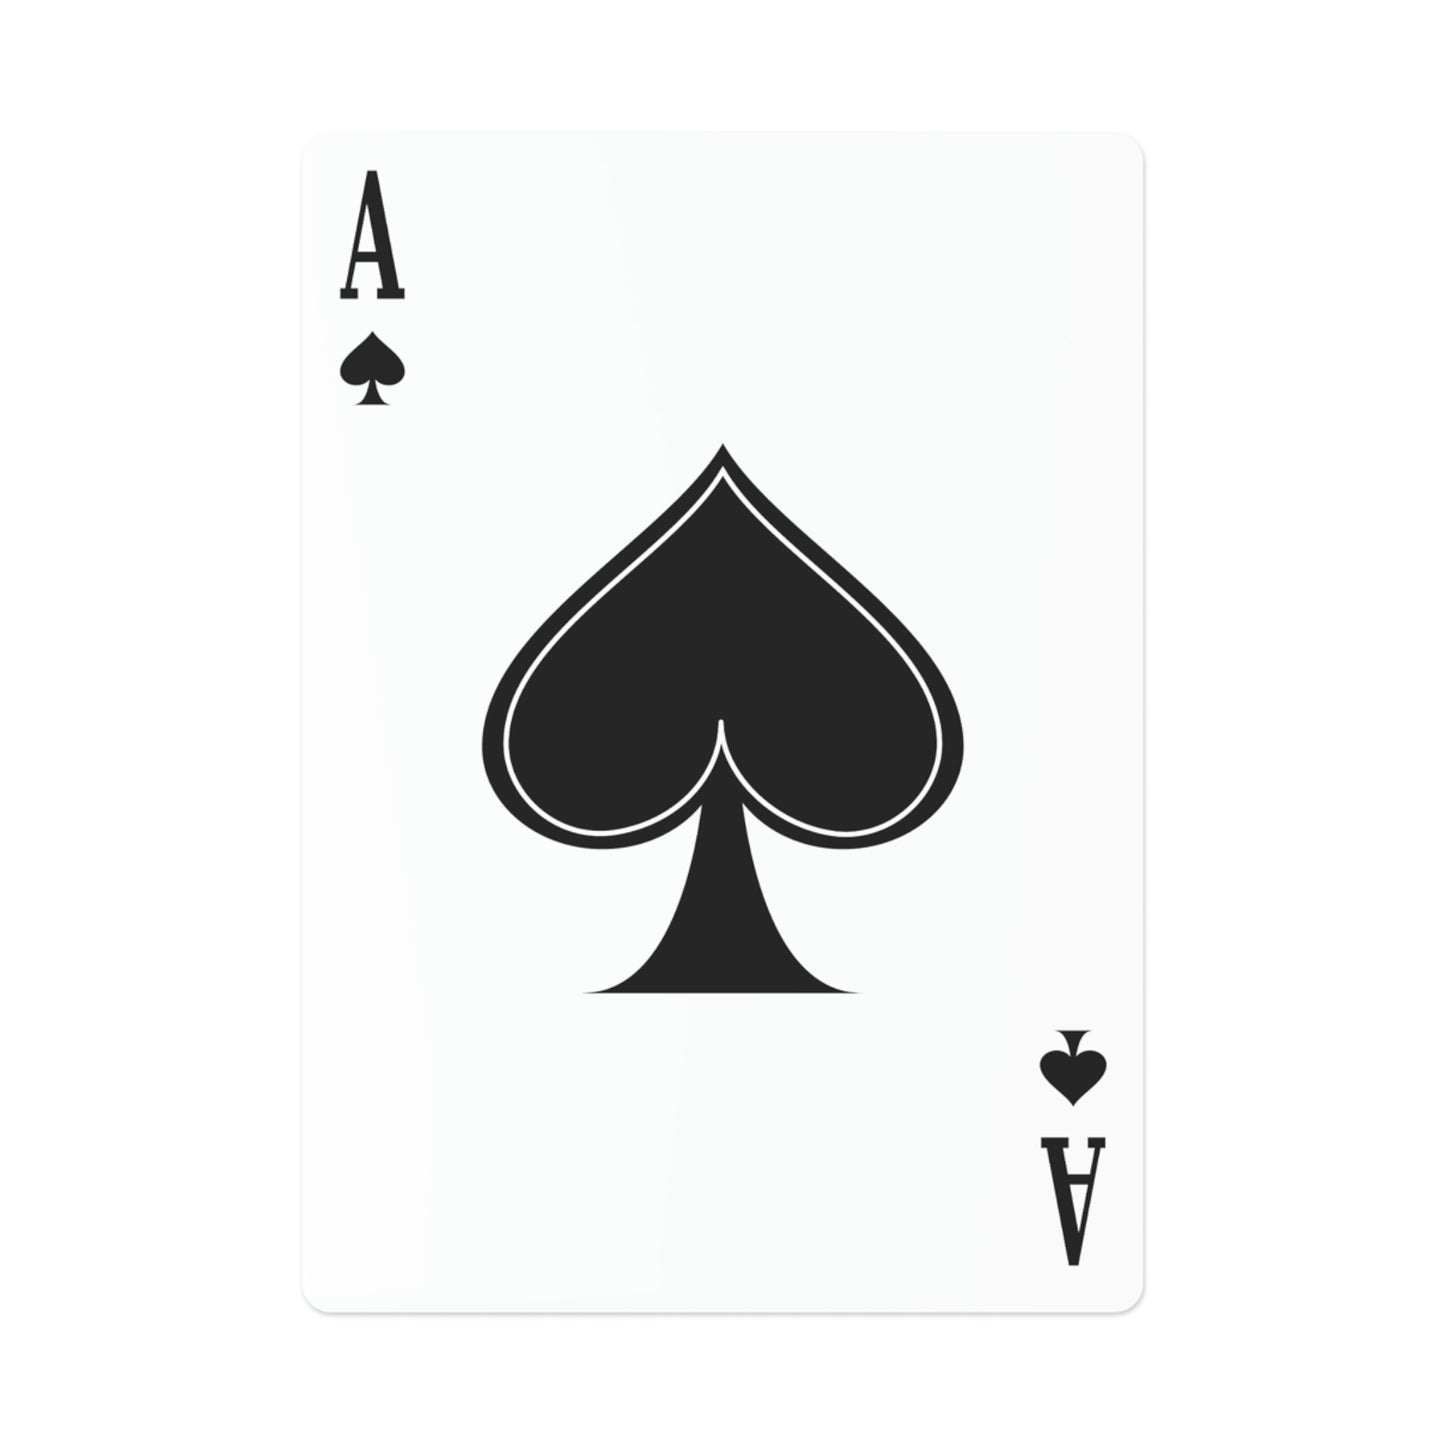 Acting Up - Playing Cards